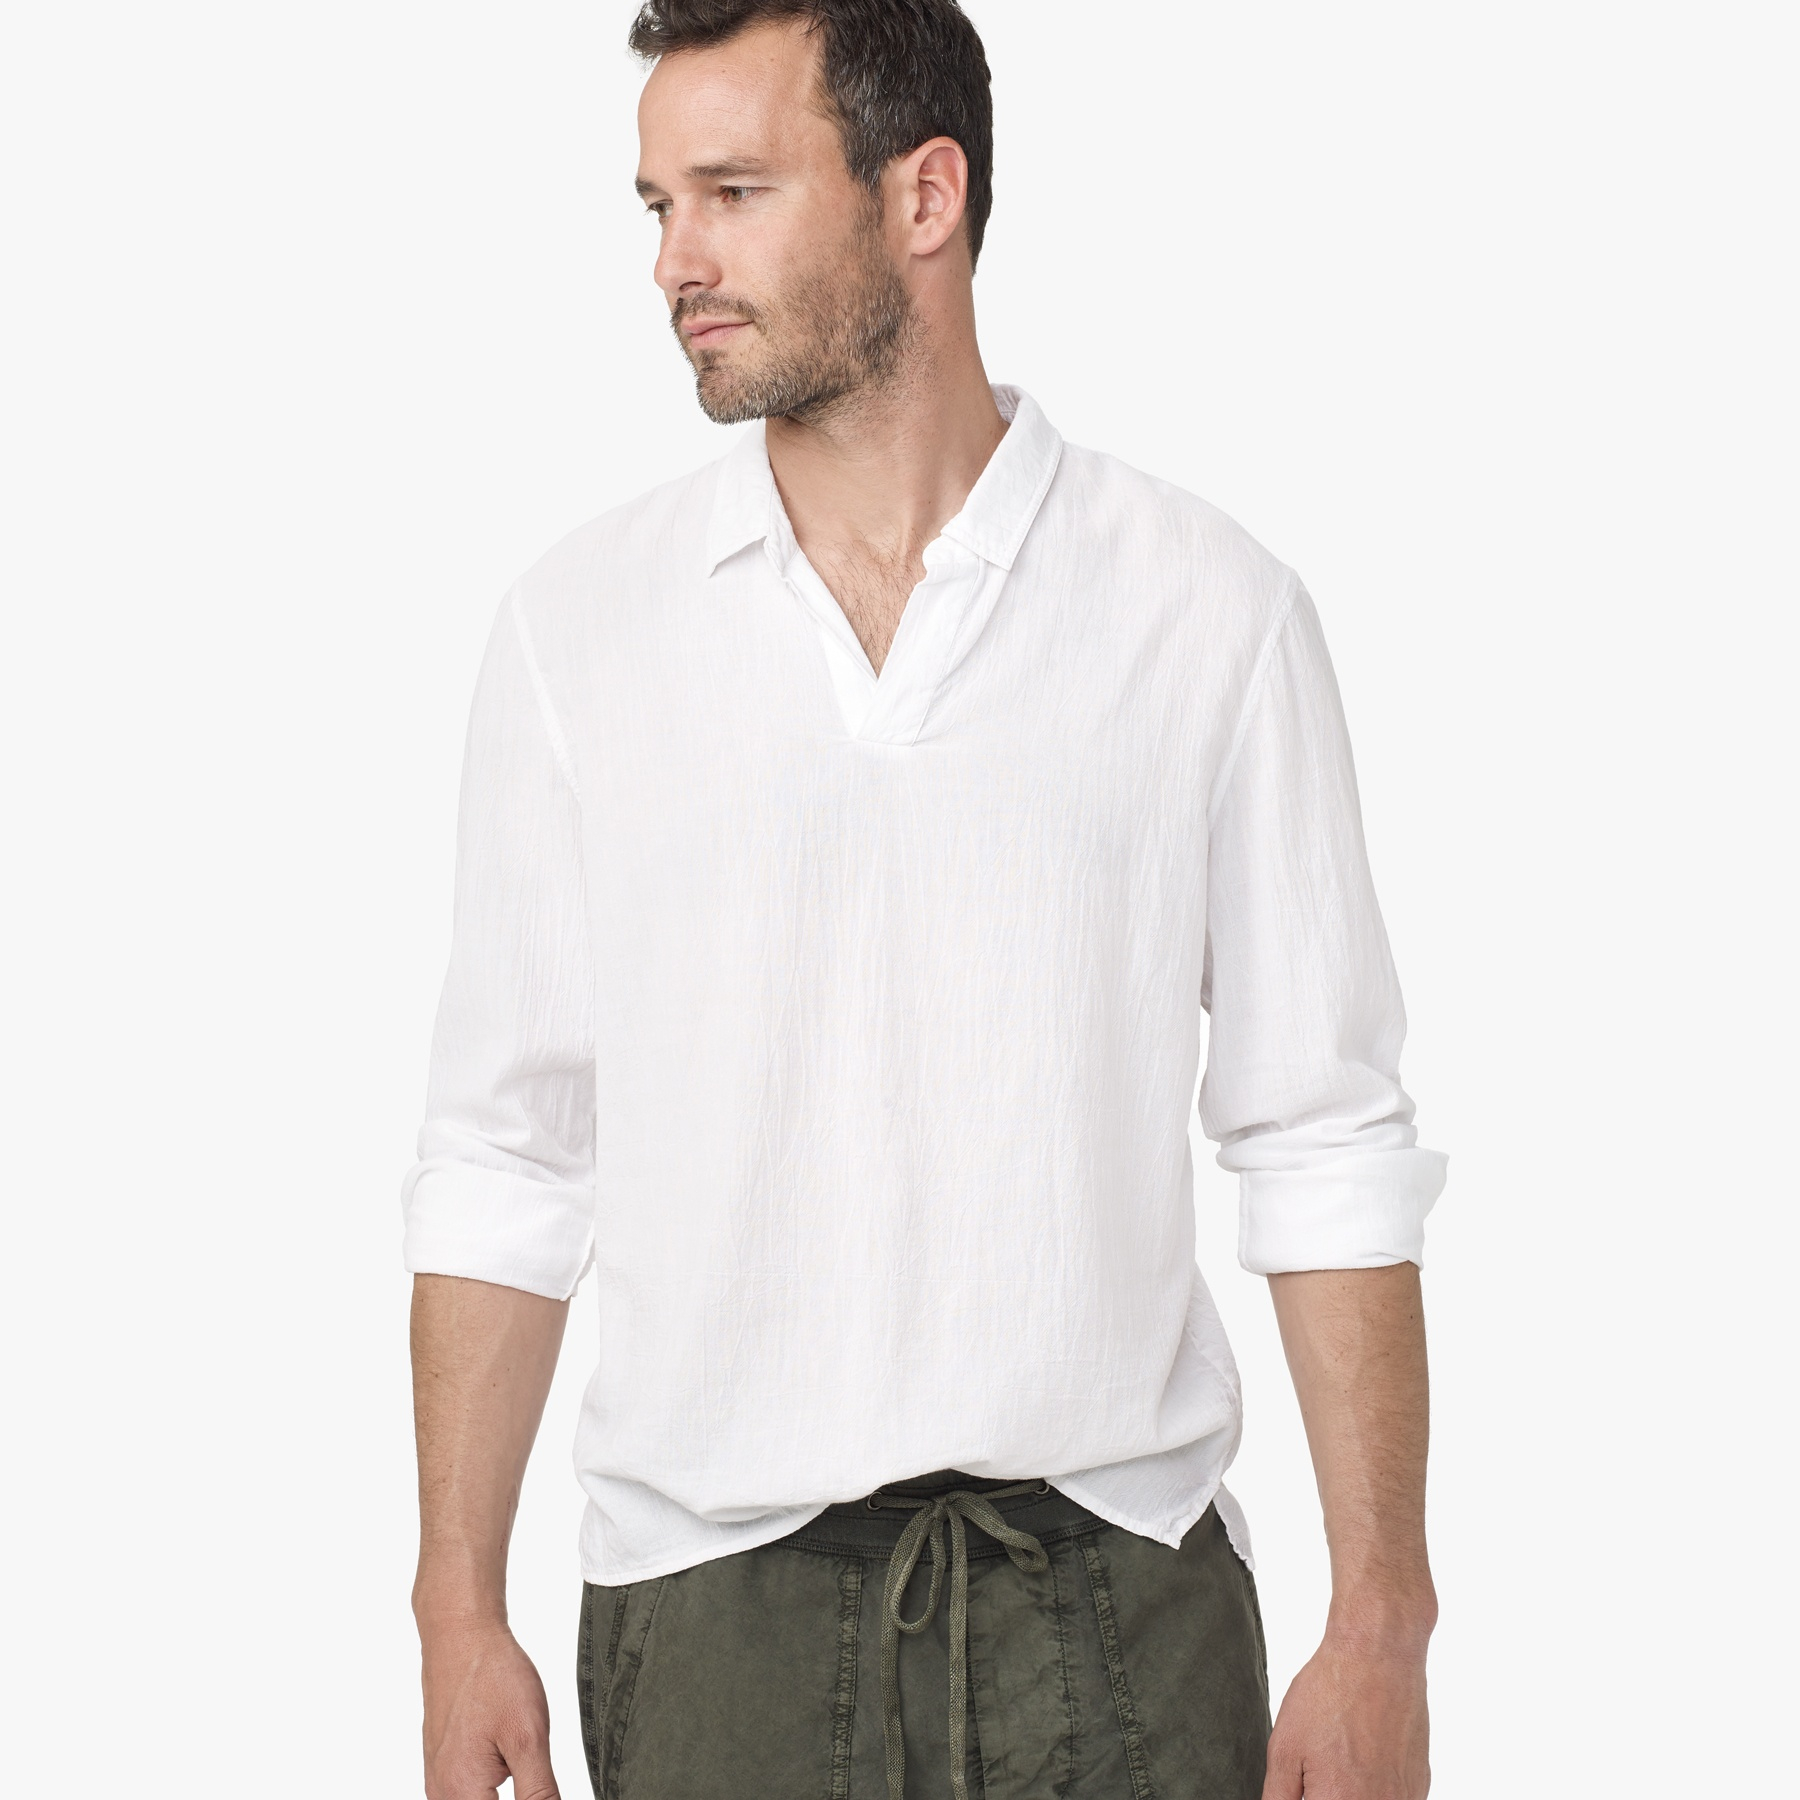 Lyst - James Perse Cotton Gauze Collared Shirt in White for Men